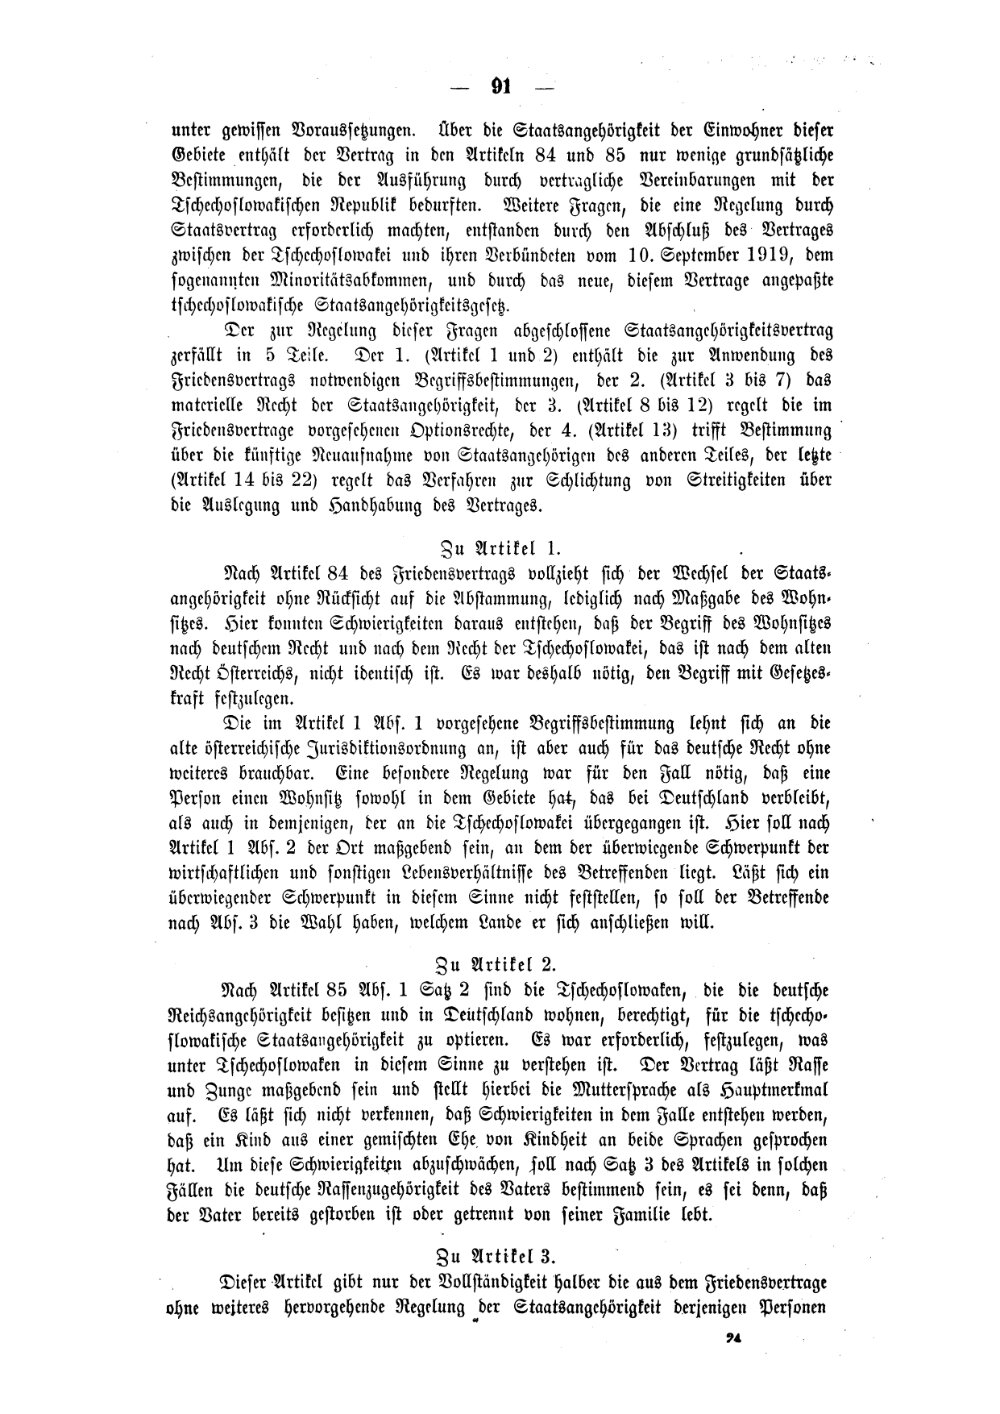 Scan of page 91